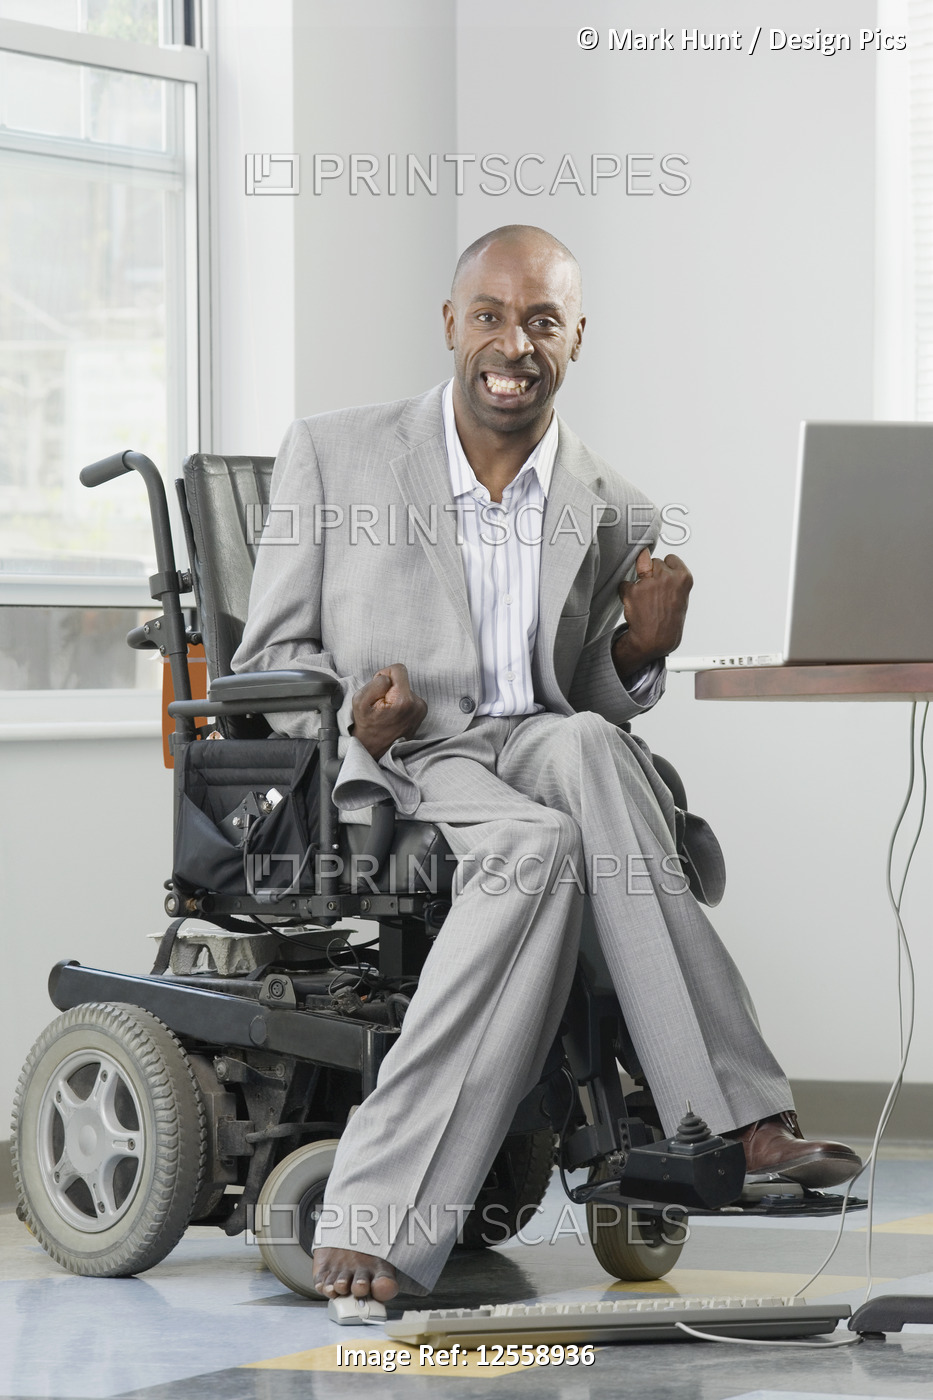 Businessman with Cerebral Palsy working on a computer with his foot